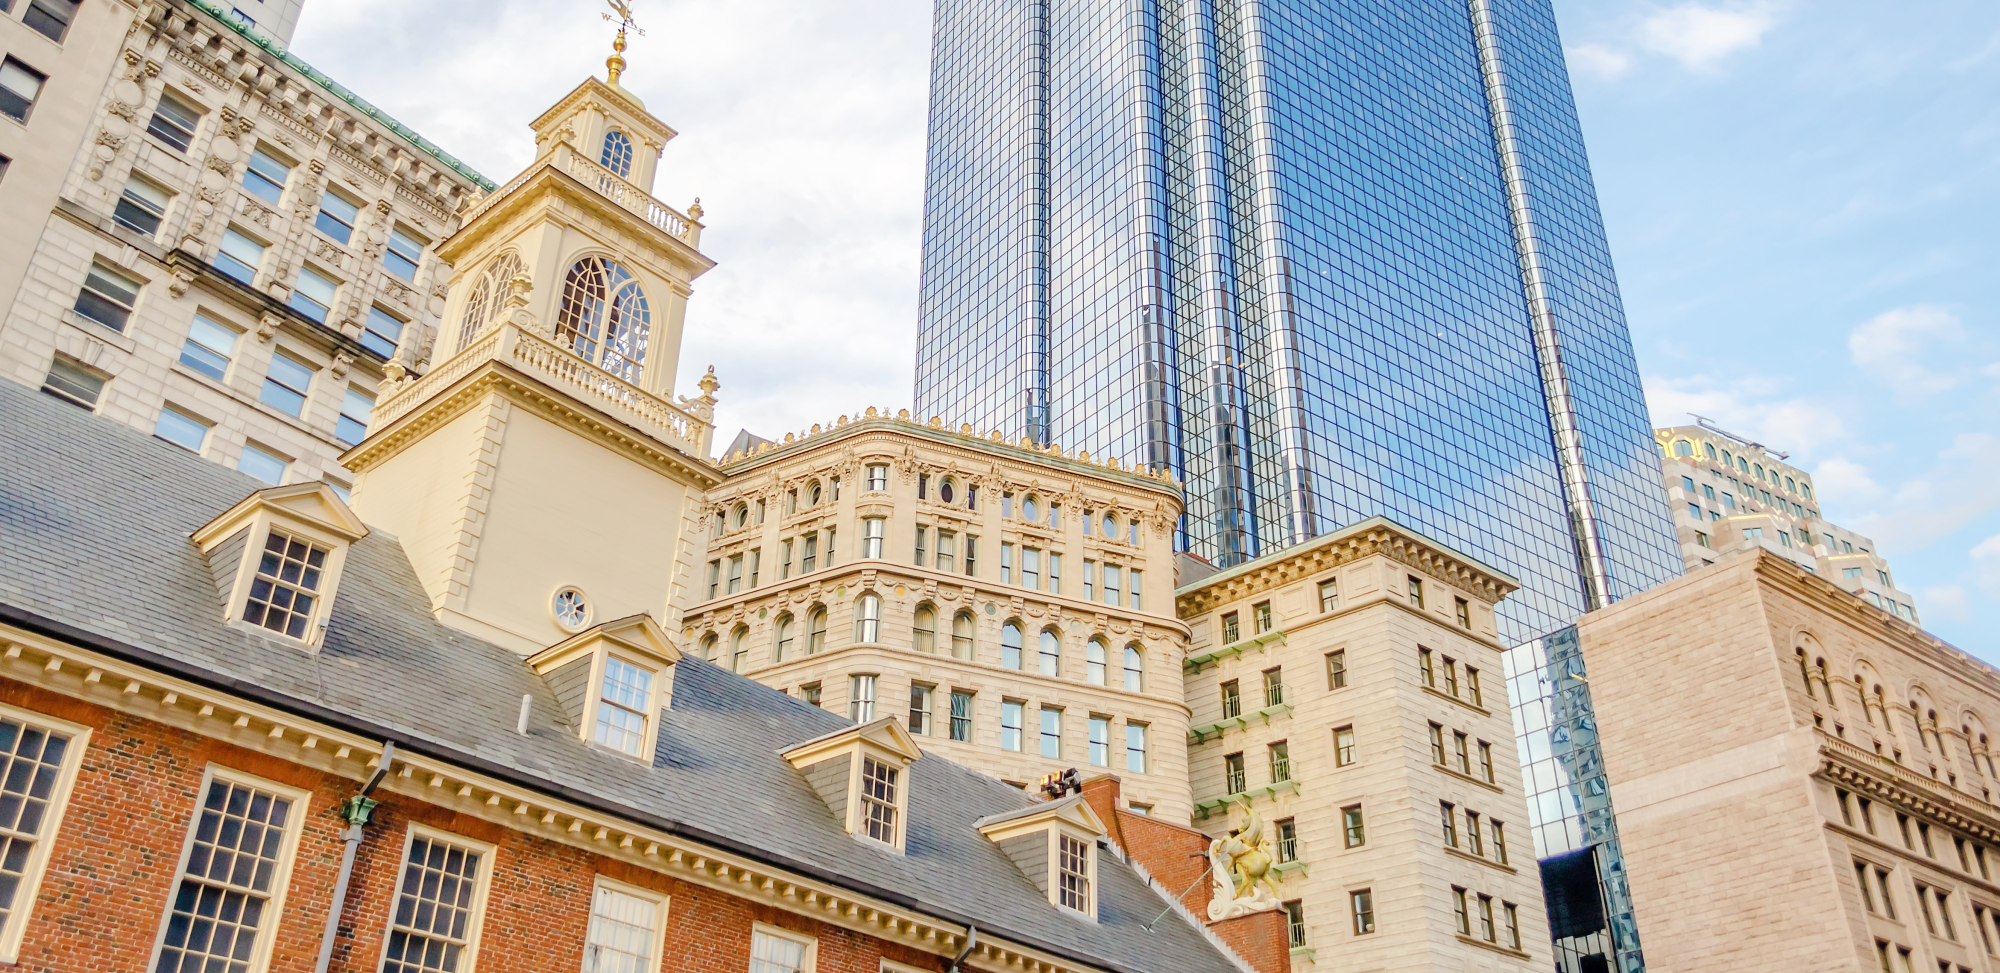 A photo of the old Boston state house with modern buildings in the background.